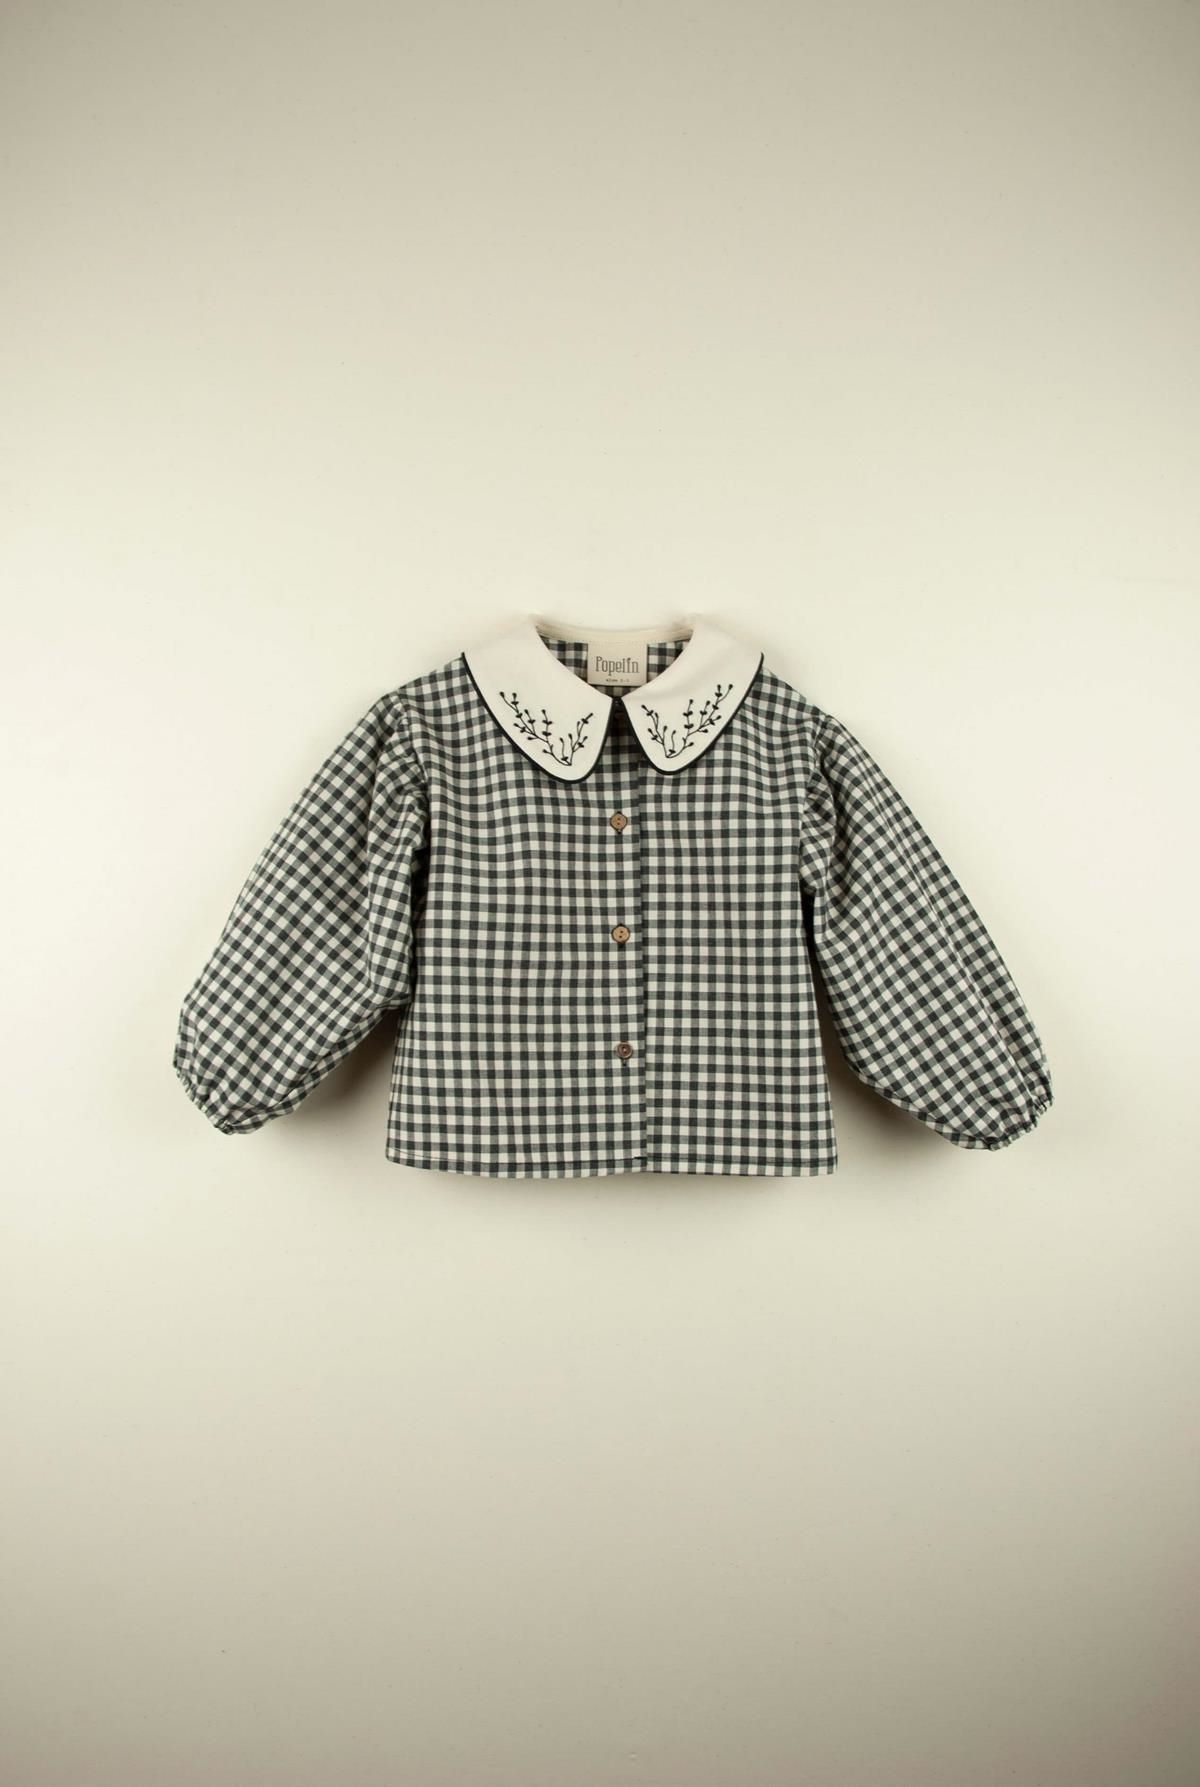 Mod.12.3 Gingham blouse with embroidered neckline | AW21.22 Mod.12.3 Gingham blouse with embroidered neckline | 1